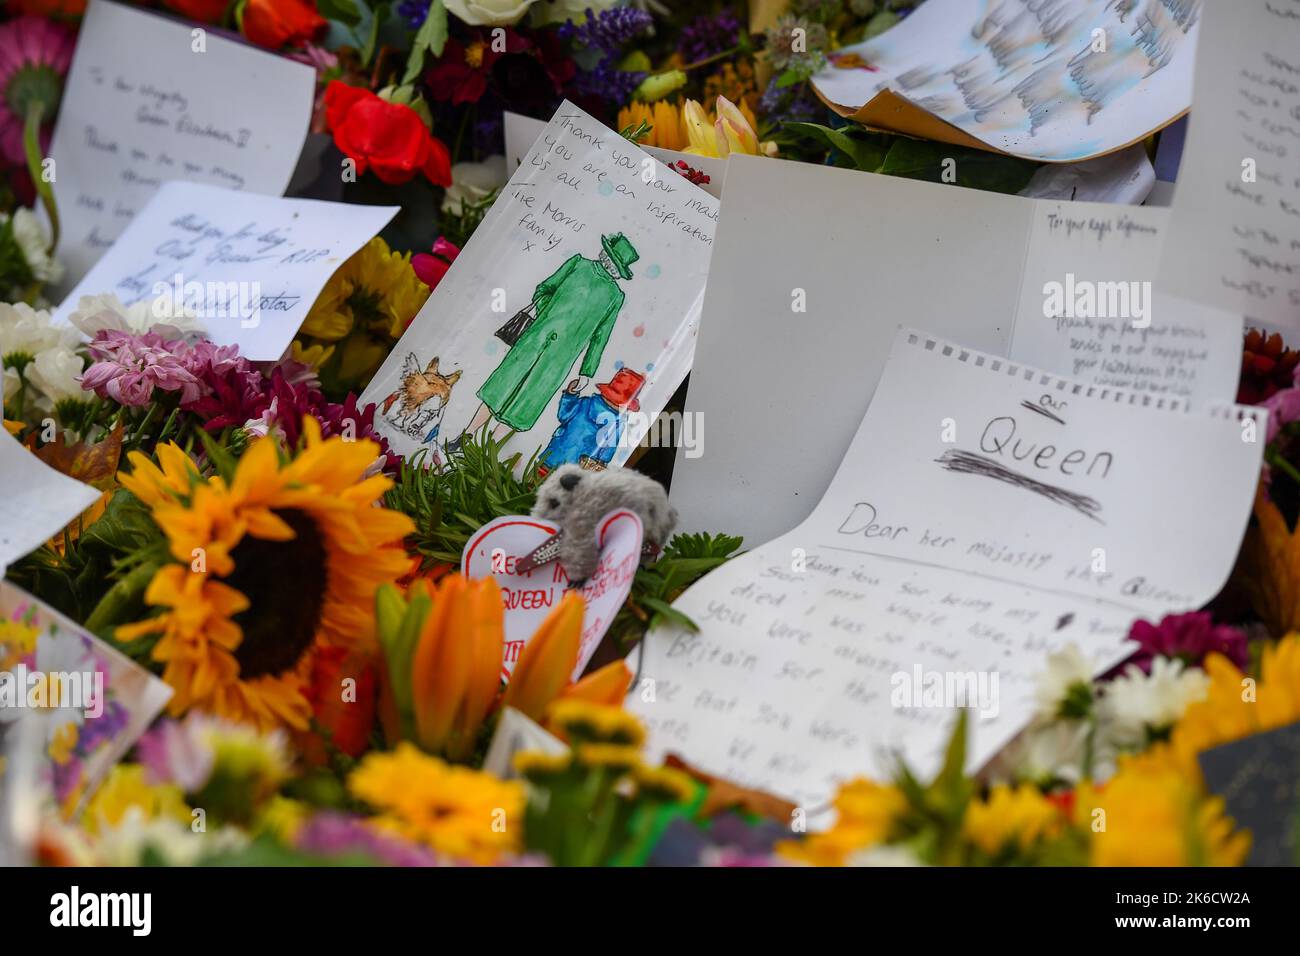 A drawing of the Queen and Paddington bear with corgis sits amongst the tributes and flowers laid for the Late Queen in Green Park London UK. Stock Photo